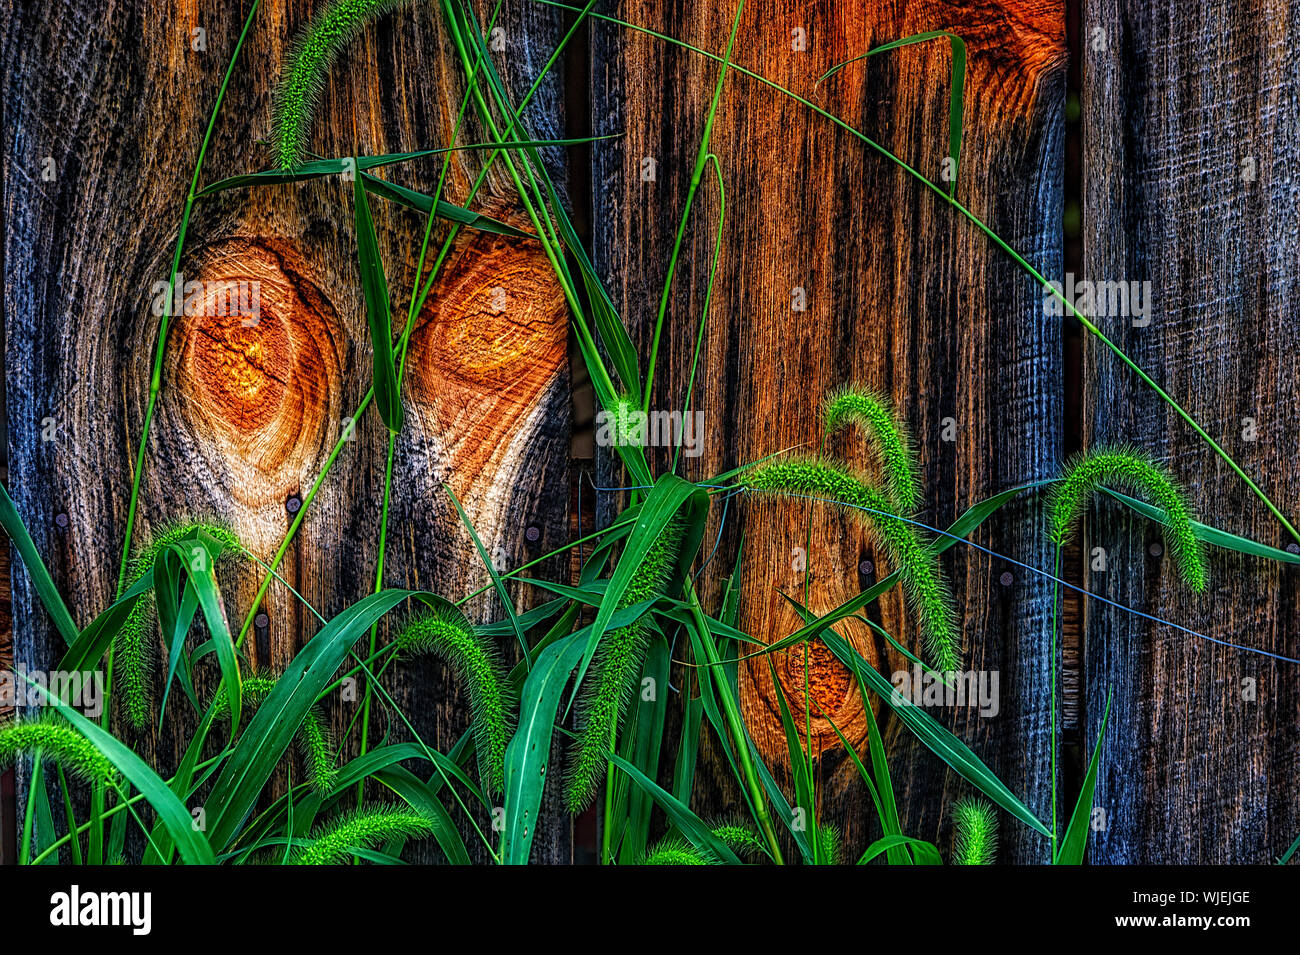 Close up of a gnarly, notty,wooden exterior wall with grass growing in front of it Stock Photo